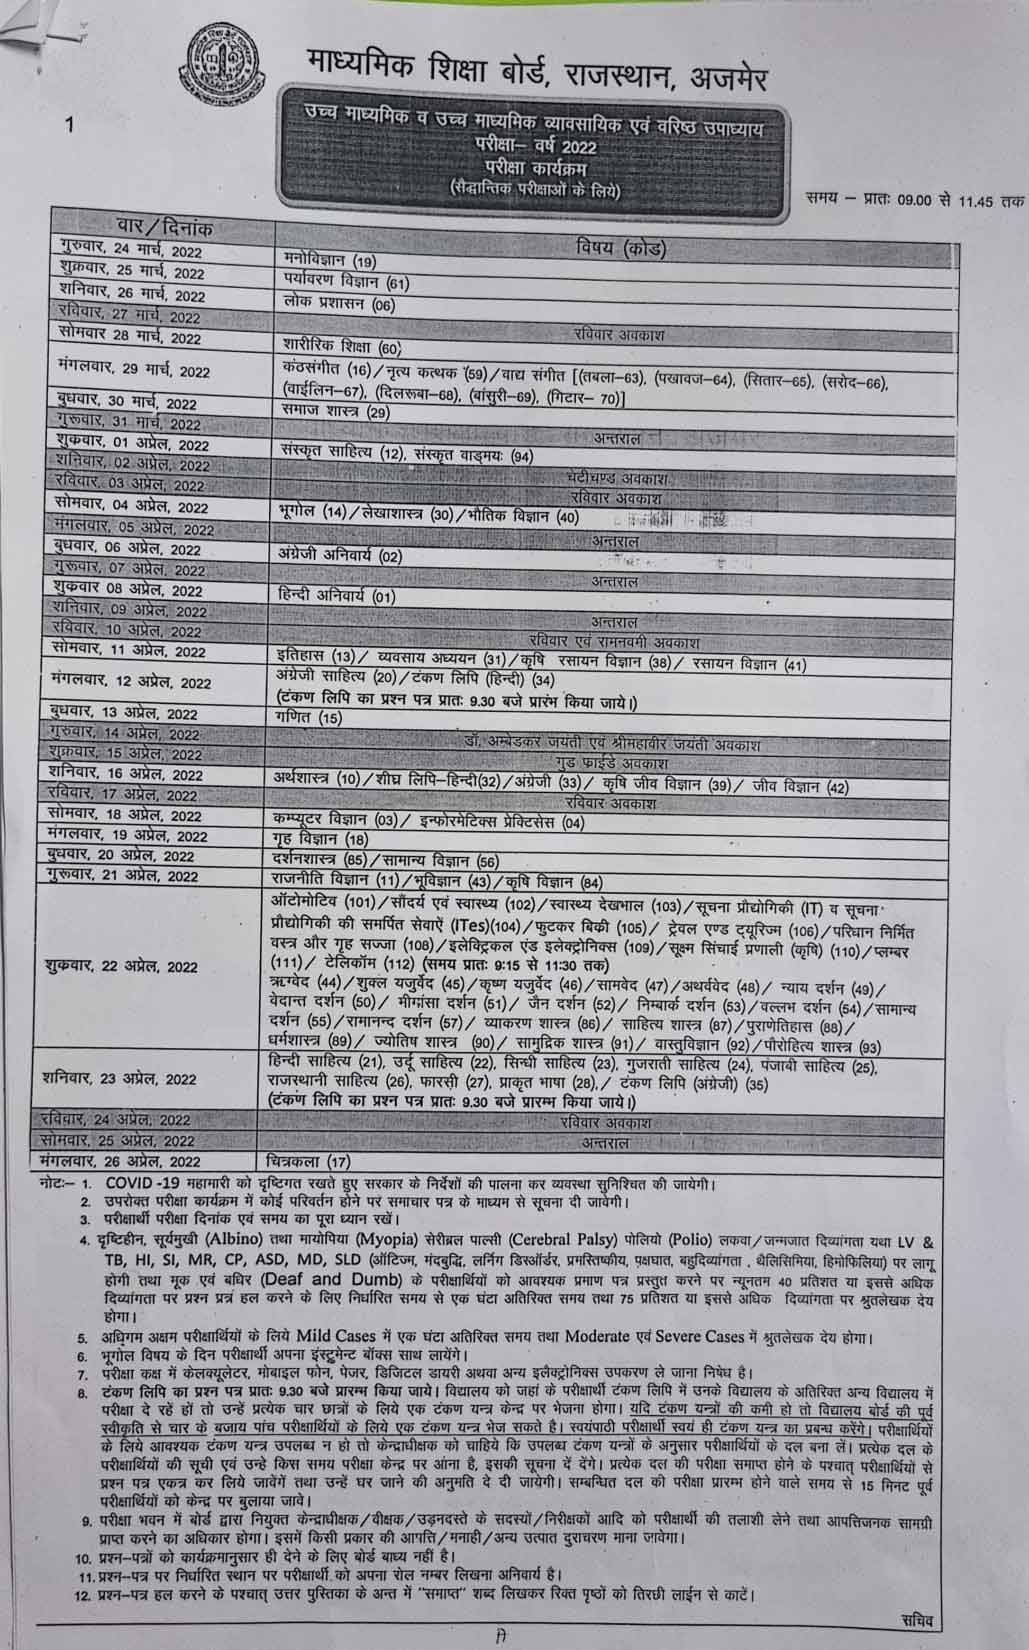 Rajasthan Board Exams 2022: Schedule of 10th, 12th examinations of Rajasthan Board